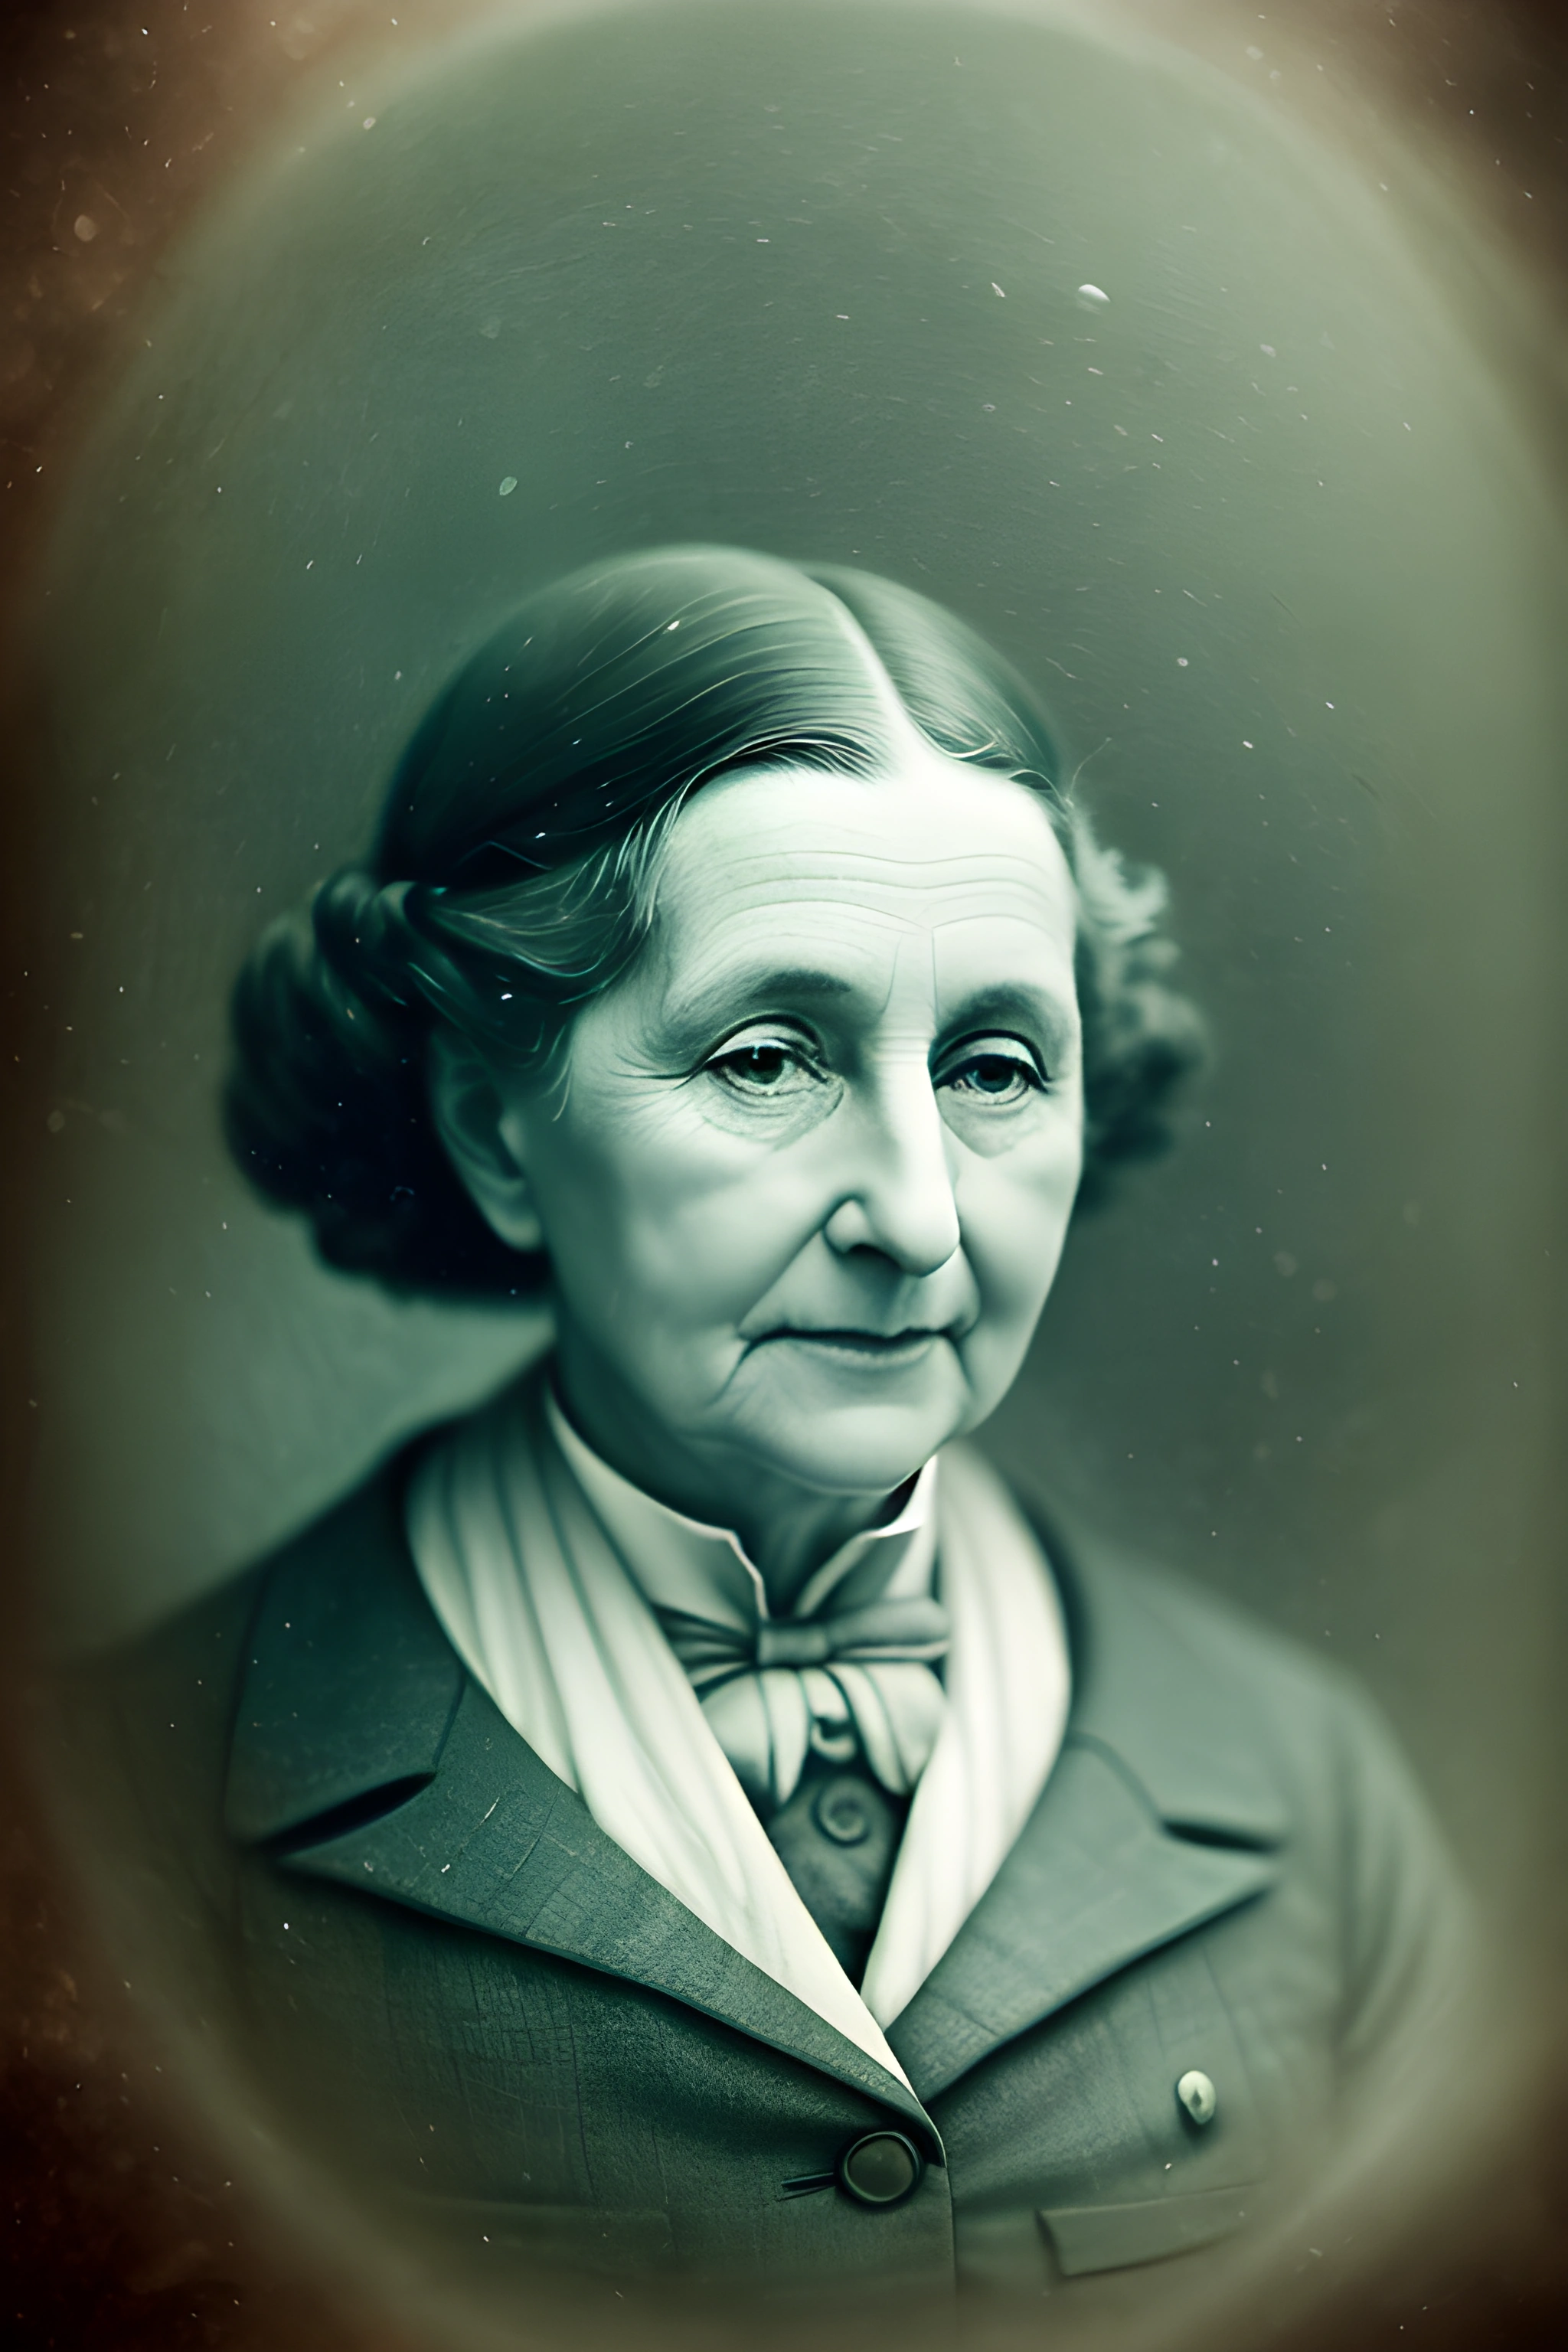 photo of a woman in a suit and tie